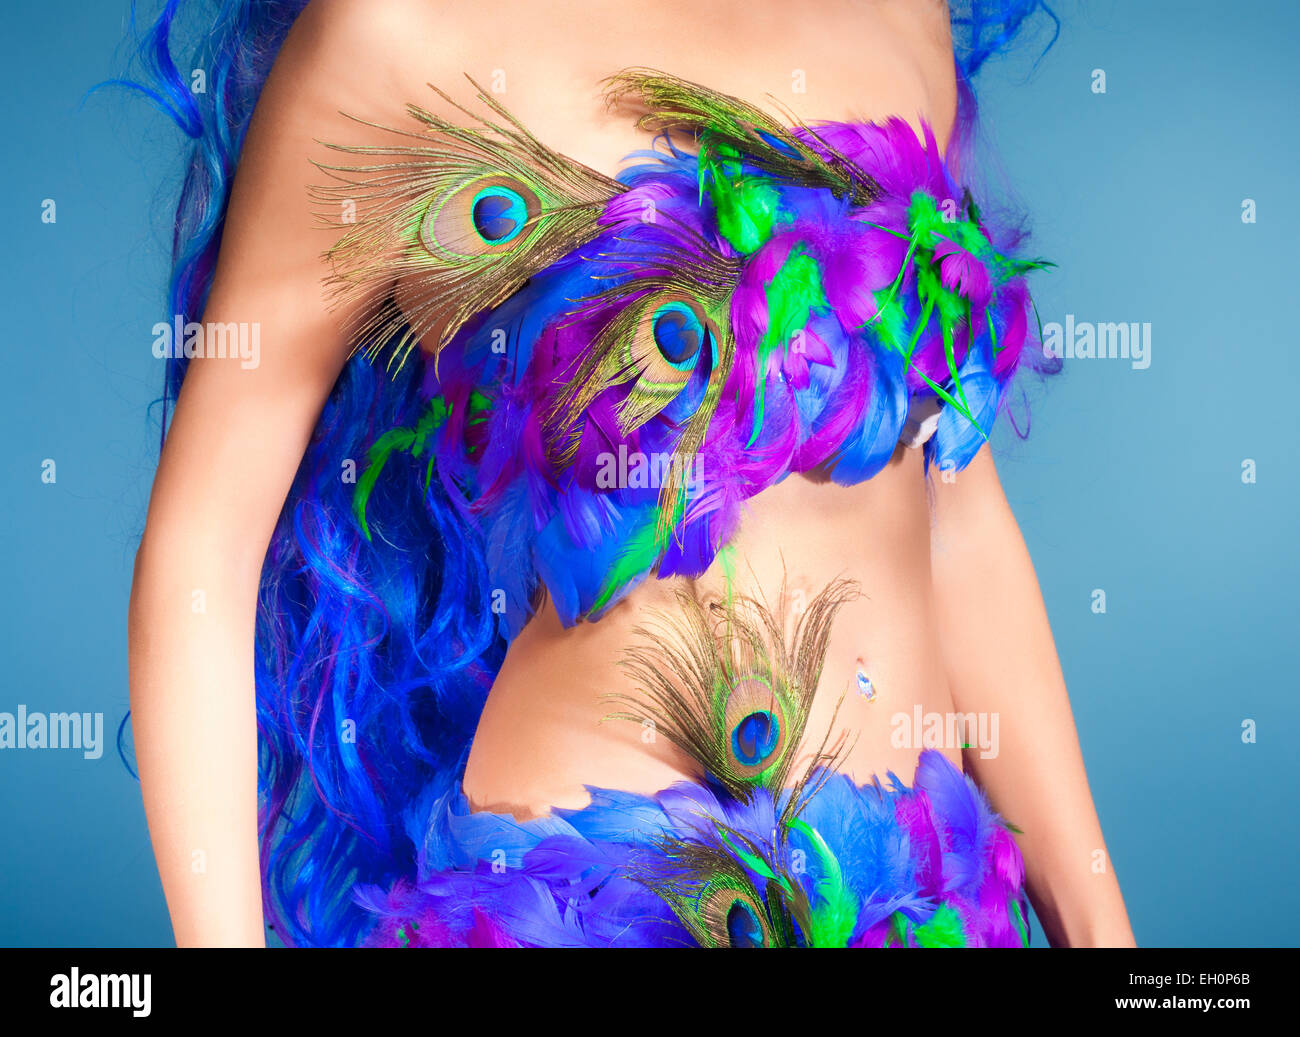 Closeup of a Female Dress Made of Feathers Stock Photo